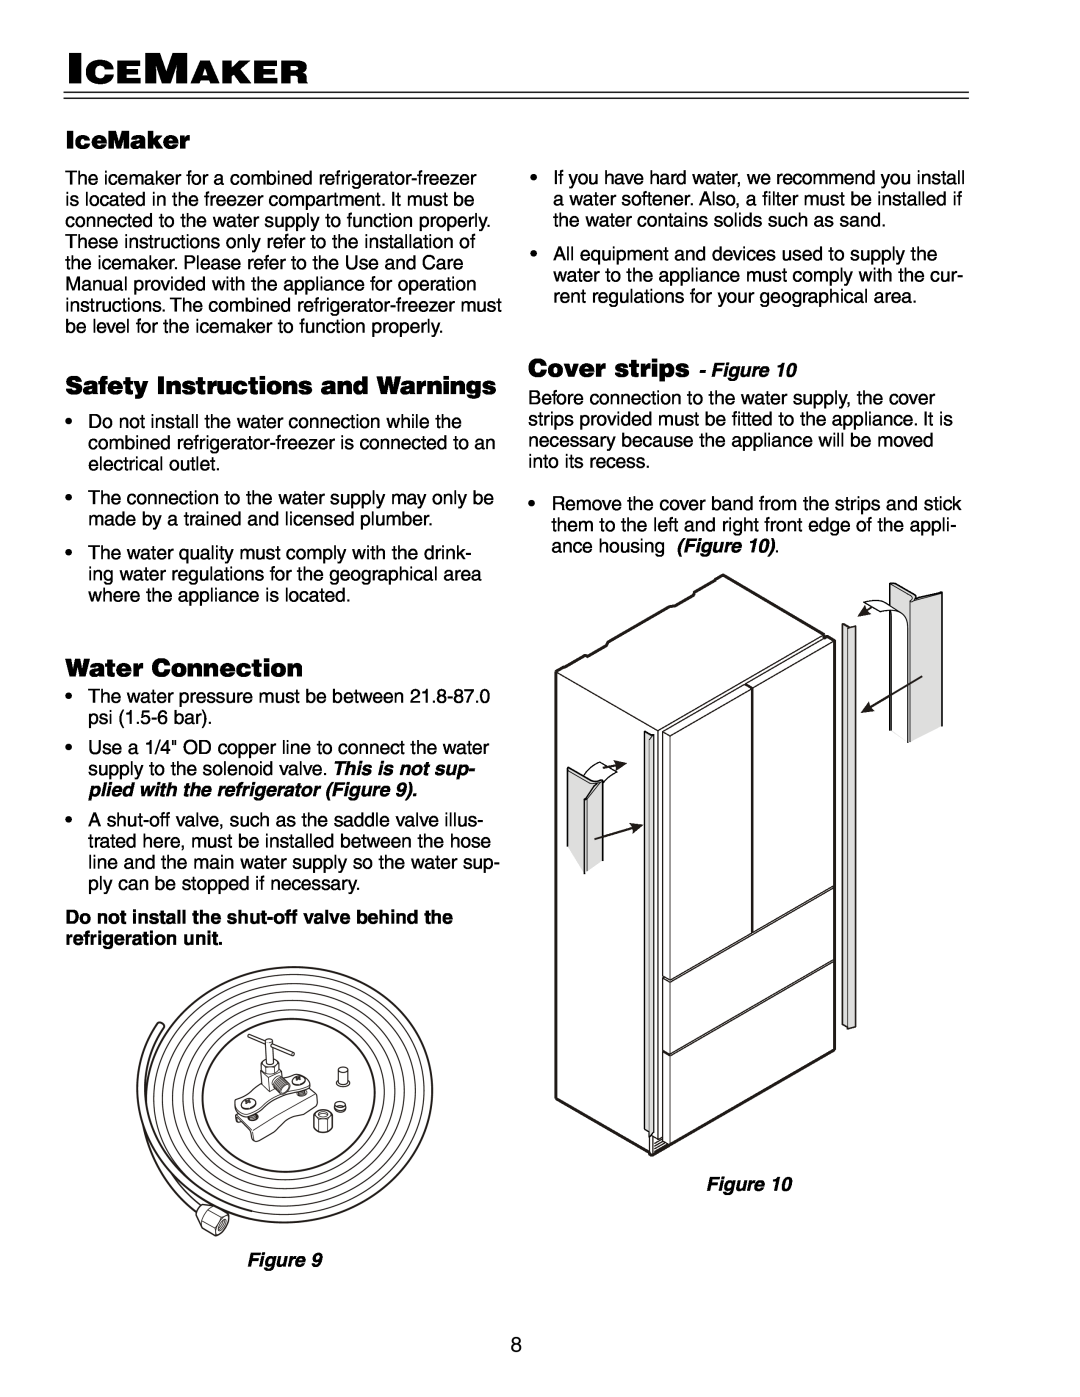 Liebherr HCS 20 Icemaker, IceMaker, Safety Instructions and Warnings, Water Connection, Cover strips - Figure 